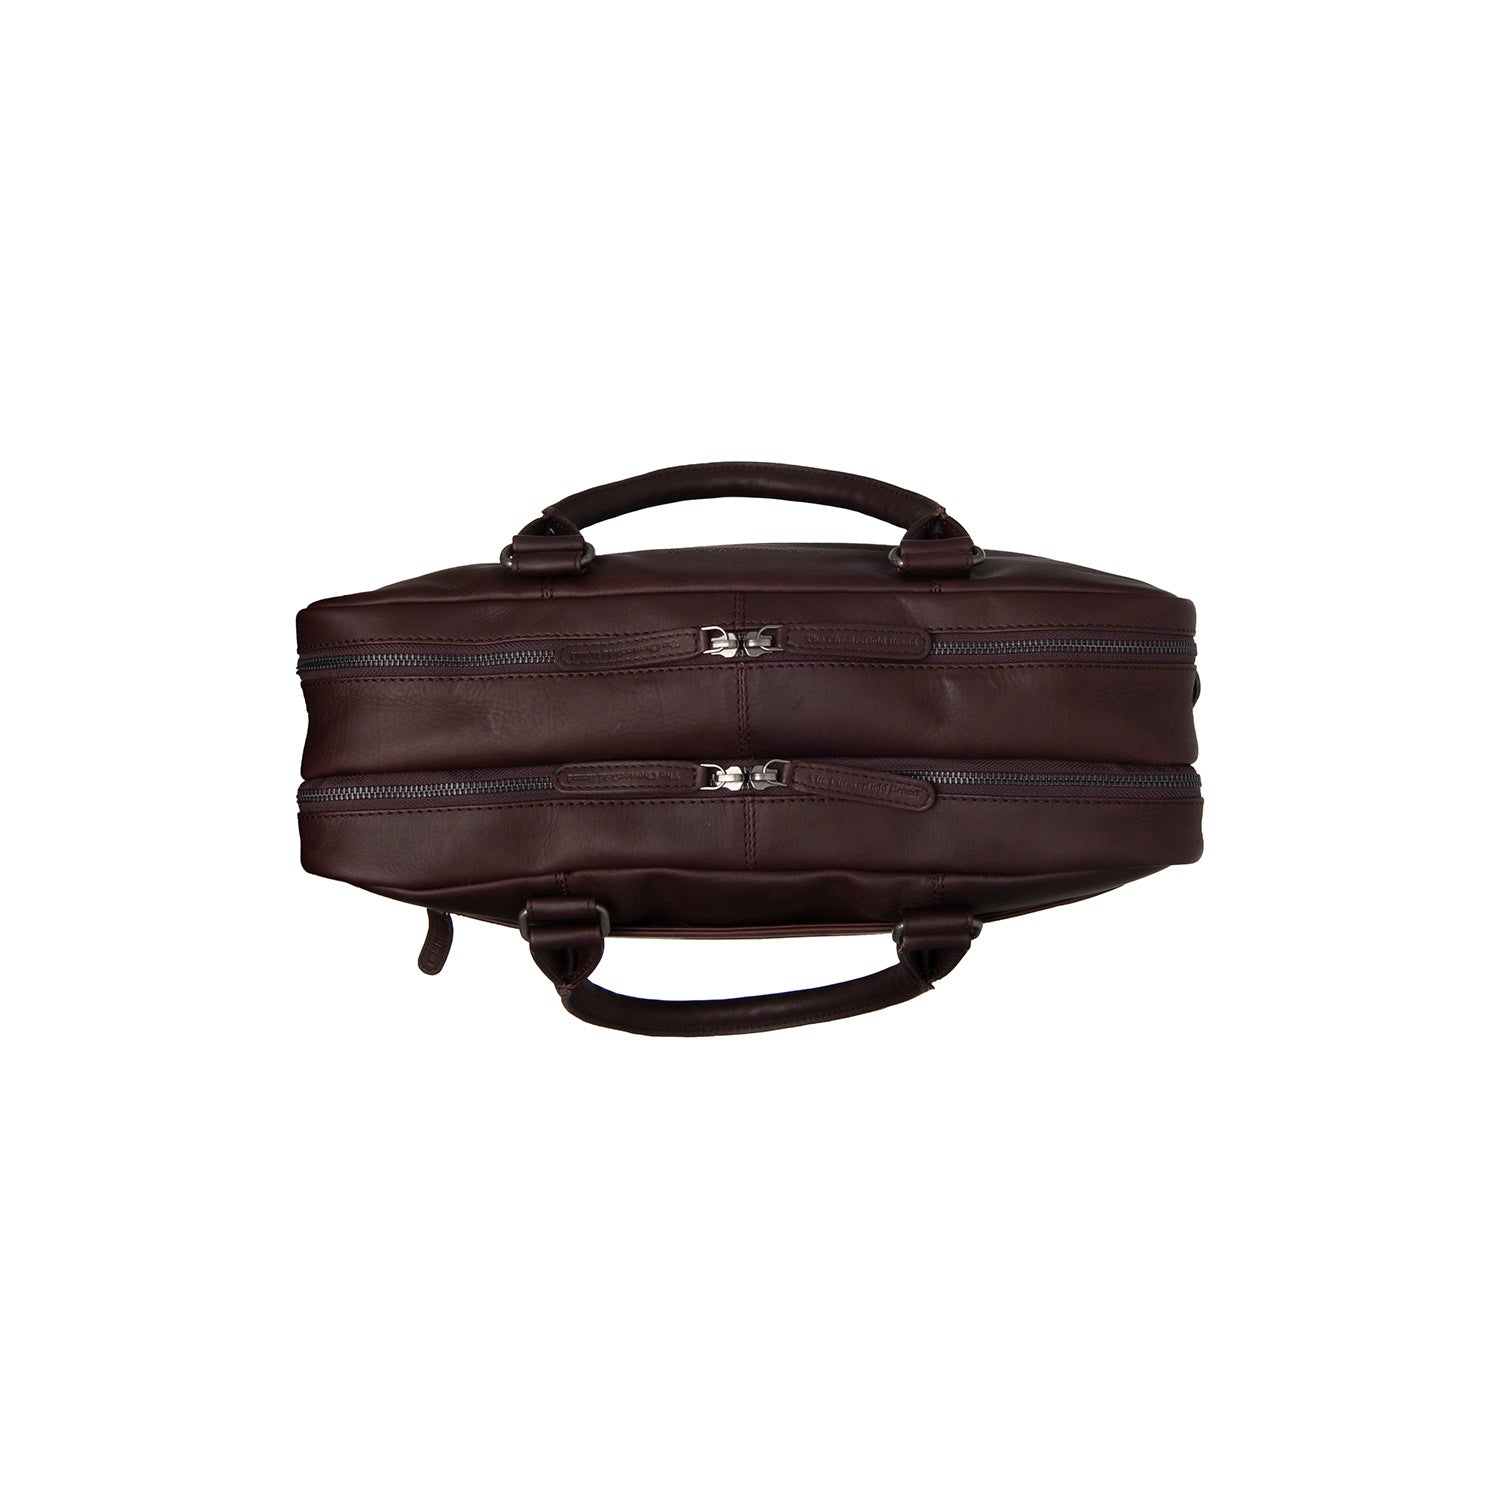 Laptop Bag - The Chesterfield Brand Boston Brown